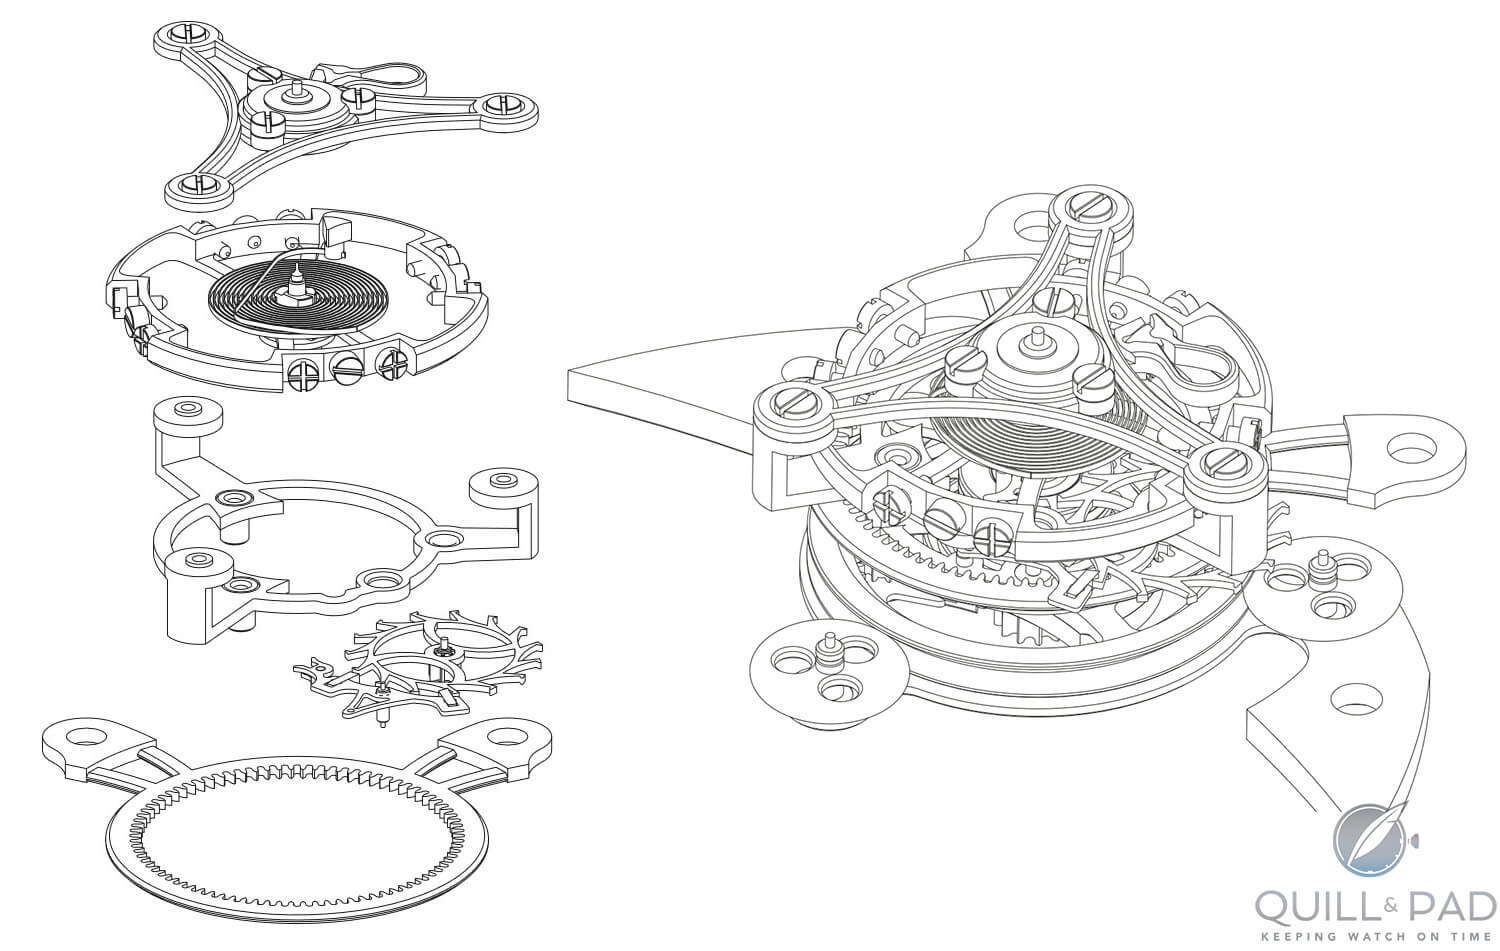 Exploded view of the tourbillon cage of the Andreas Strehler Trans-axial Remontoir Tourbillon (left) tourbillon and co-axial tourbillon/remontoir regulator (right)